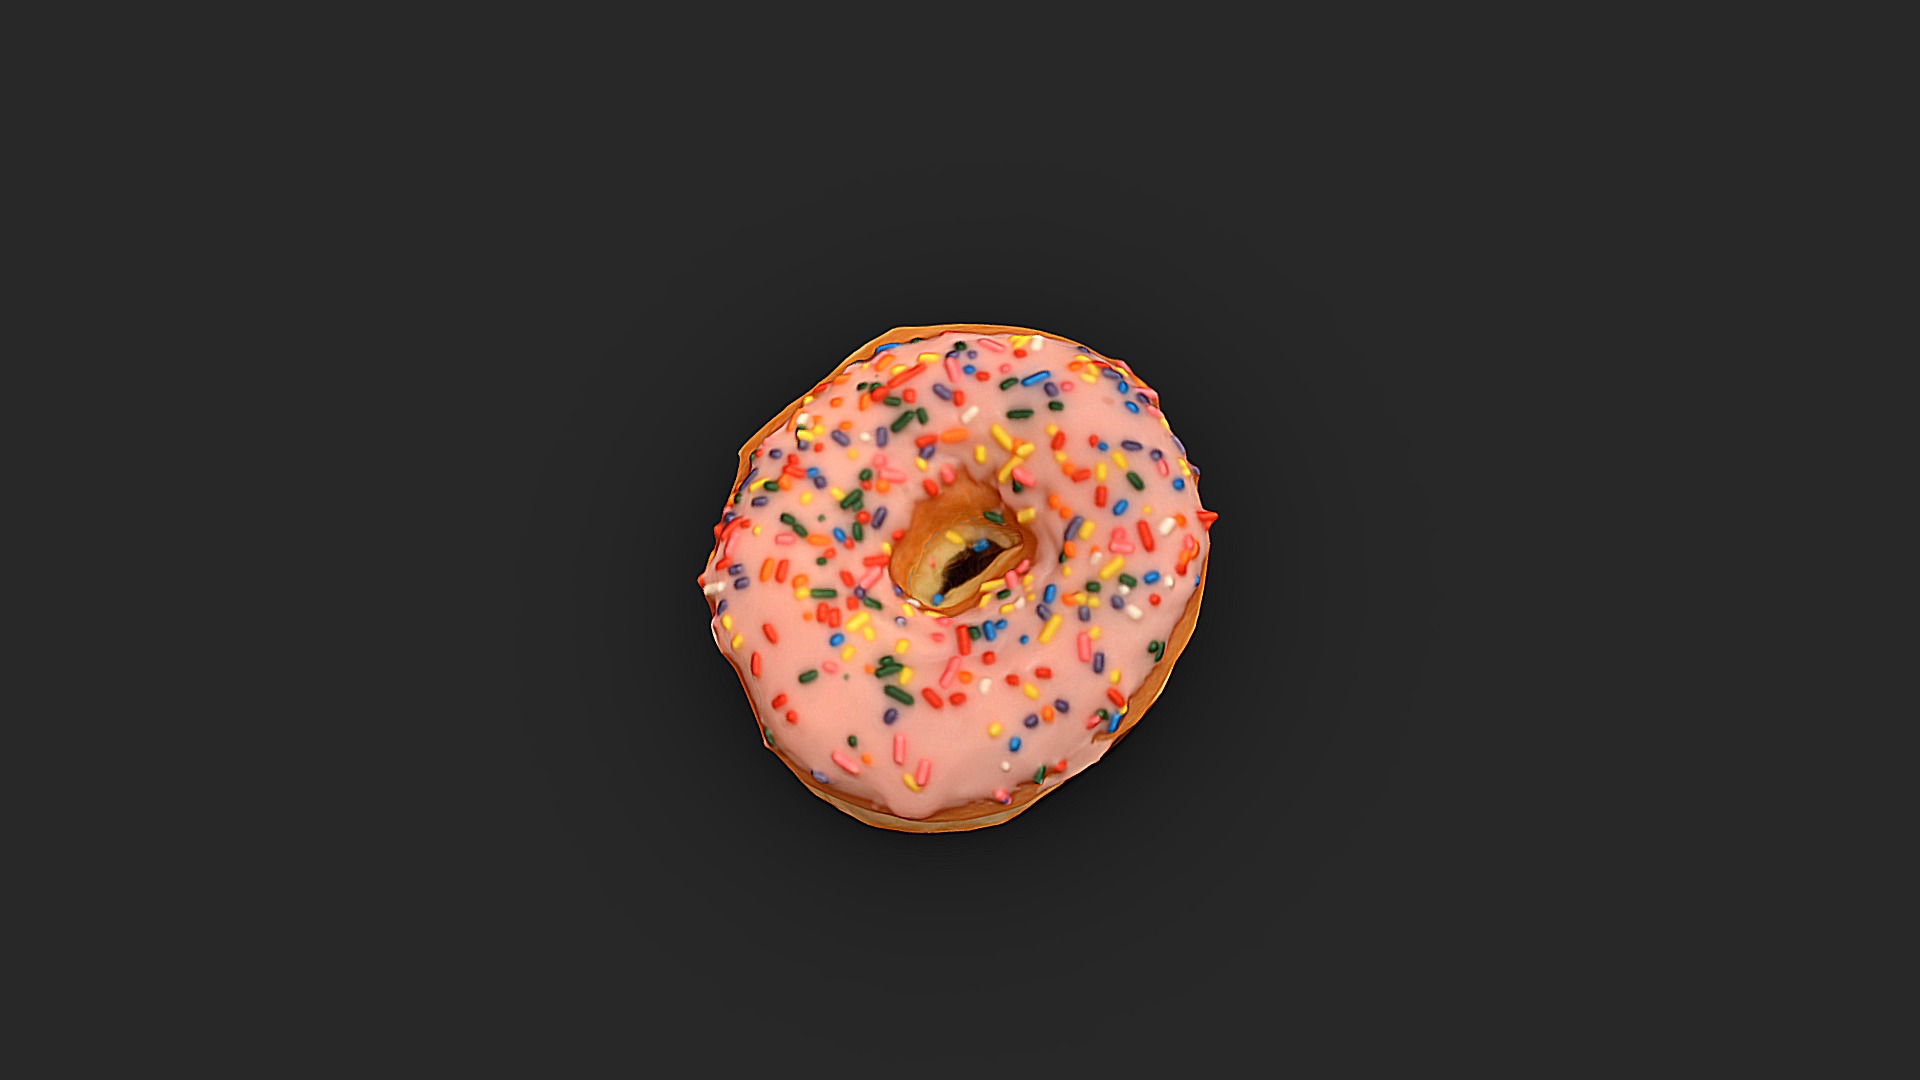 3D model Strawberry Frosted Donut with Sprinkles 3D model - This is a 3D model of the Strawberry Frosted Donut with Sprinkles 3D model. The 3D model is about a donut with sprinkles on it.